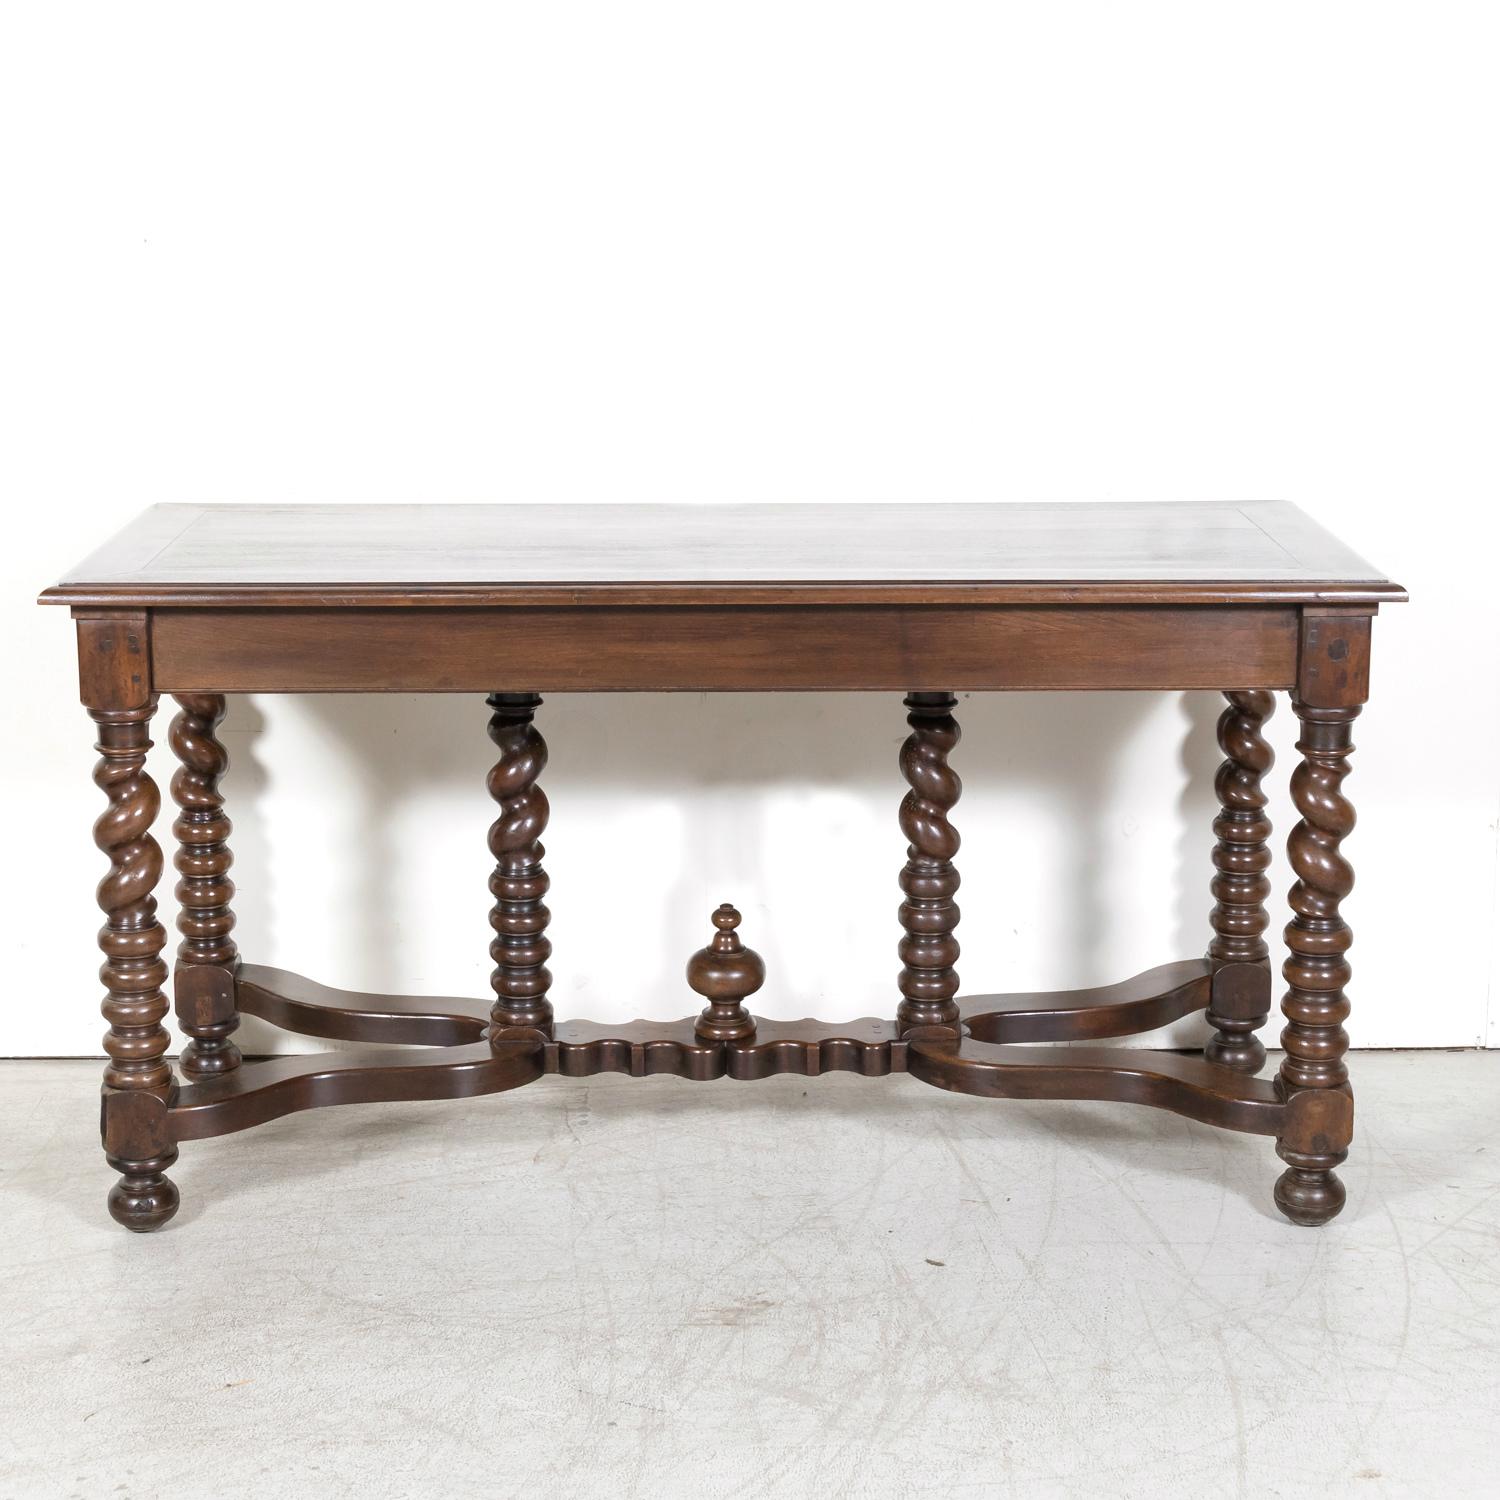 19th Century French Louis XIII Style Walnut Barley Twist Console Table For Sale 16